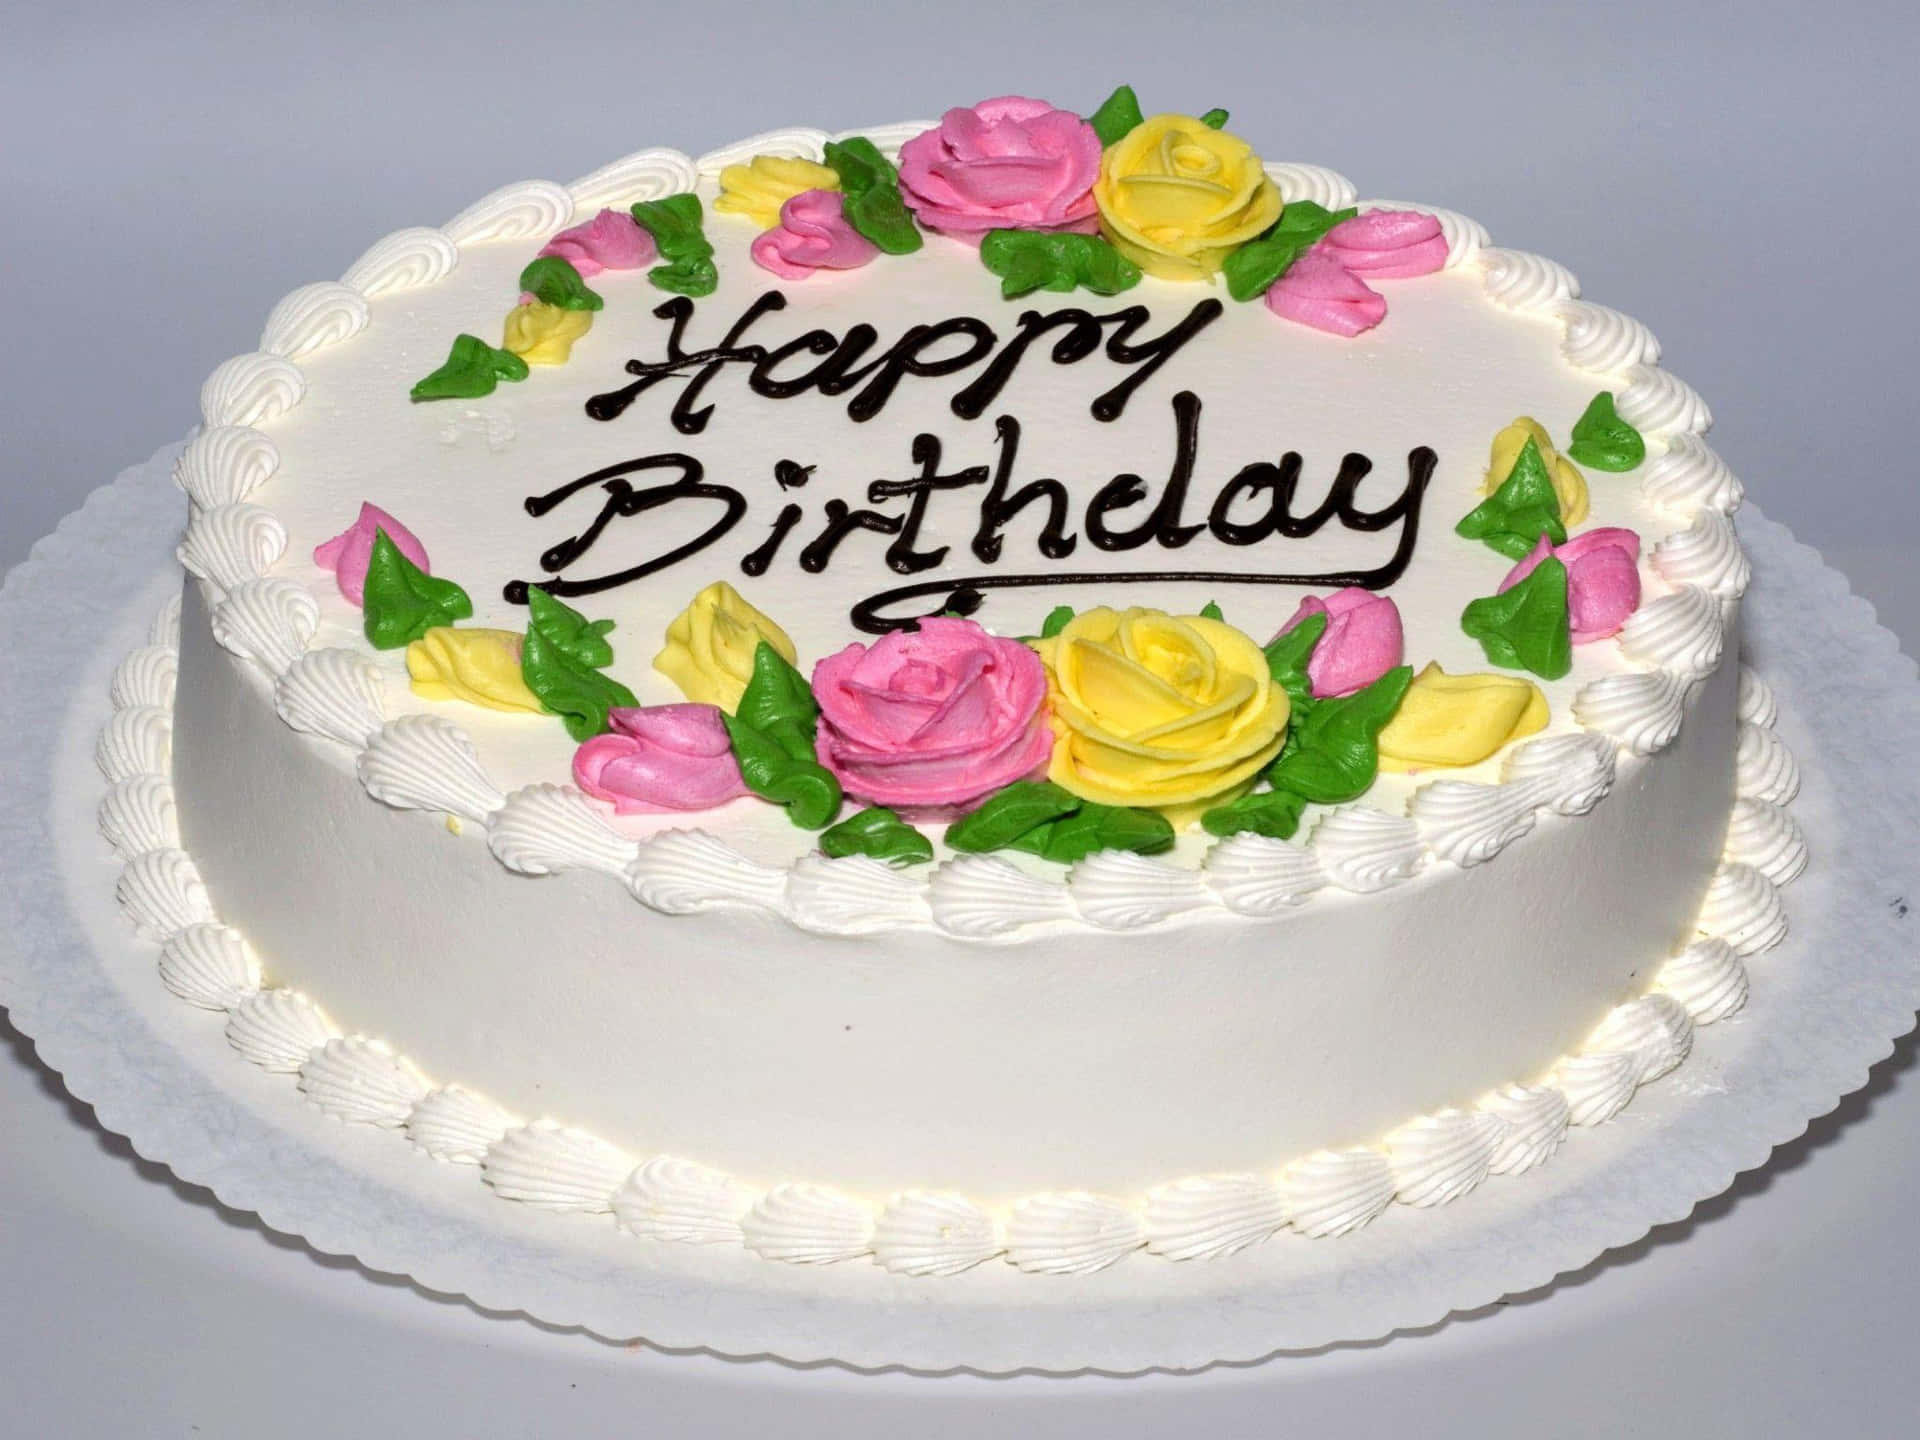 A White Cake With Flowers On It Is Decorated With Happy Birthday